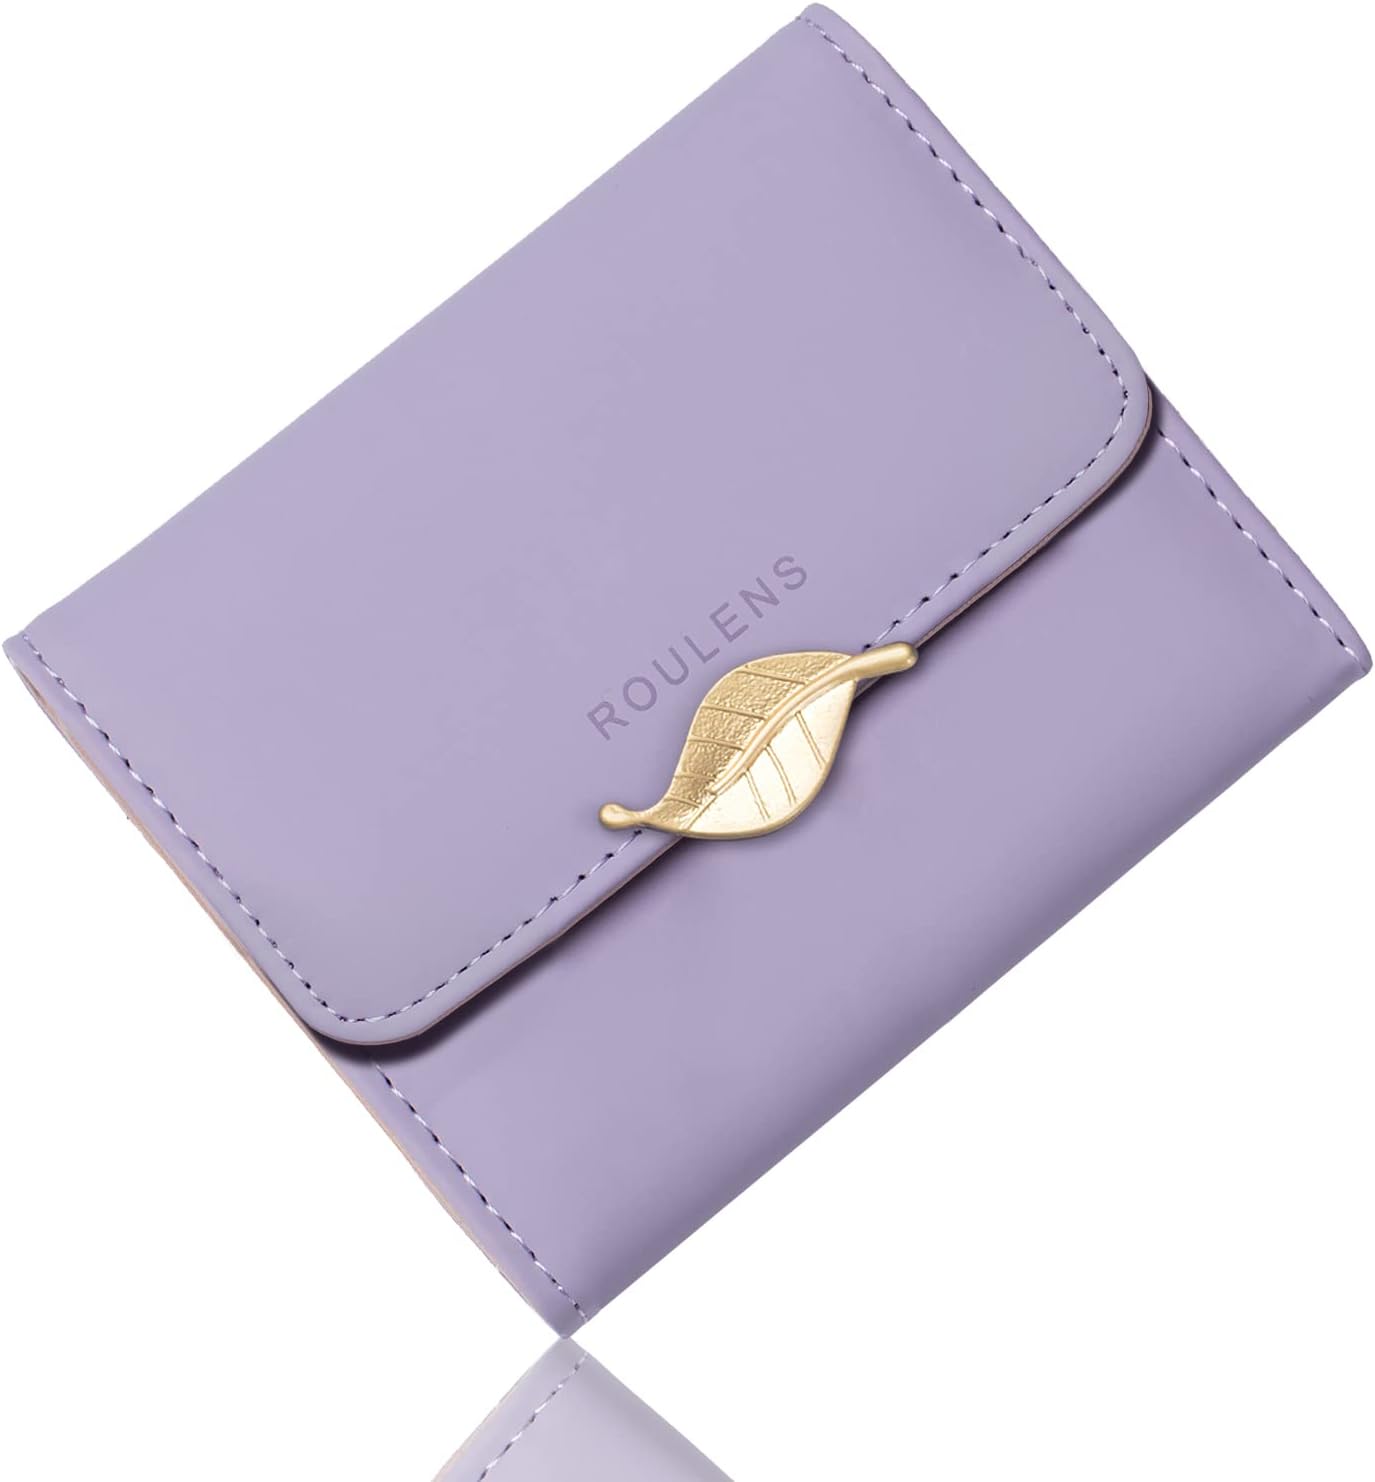 This wallet has a very unique feel to it that makes me want to hold it all the time. Its so soft and easy to wipe off! It holds everything I need and more. Its also a beautiful touch that I added to my purse and they both look like they were meant for each other.